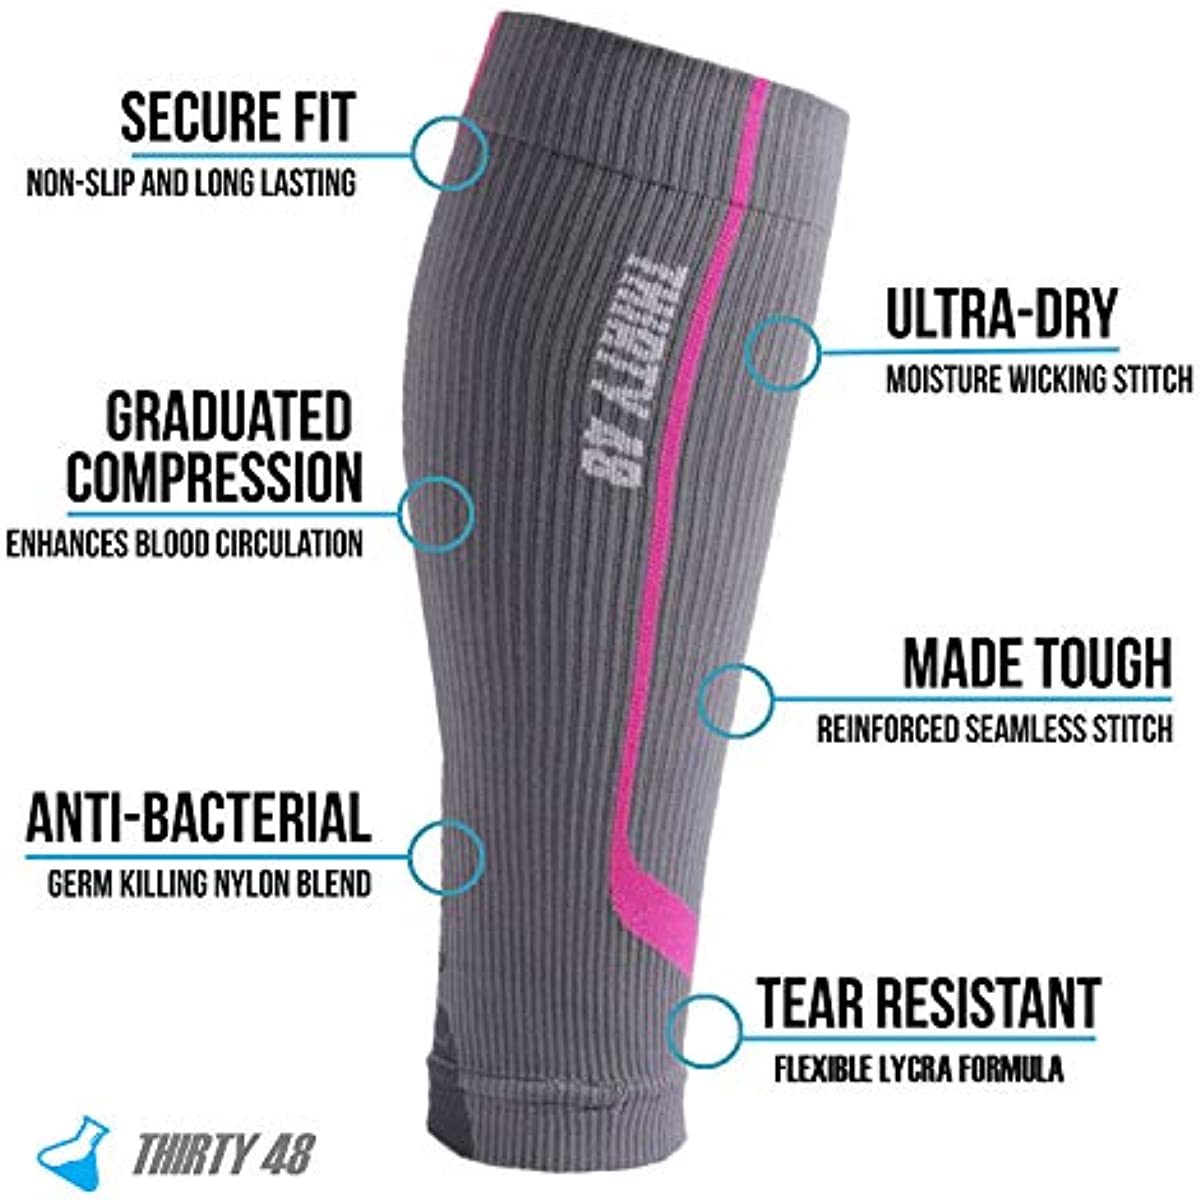 Graduated Compression Sleeves by Thirty48 Cp Series, Calf/Shin Splint Guard Sock; 1 Pair; Maximize Faster Recovery by Increasing Oxygen to Muscles; Great for Running, Cycling, Walking, Basketball, Football Soccer, Cross Fit, Travel; Money Back Guarantee Gray/Pink Small